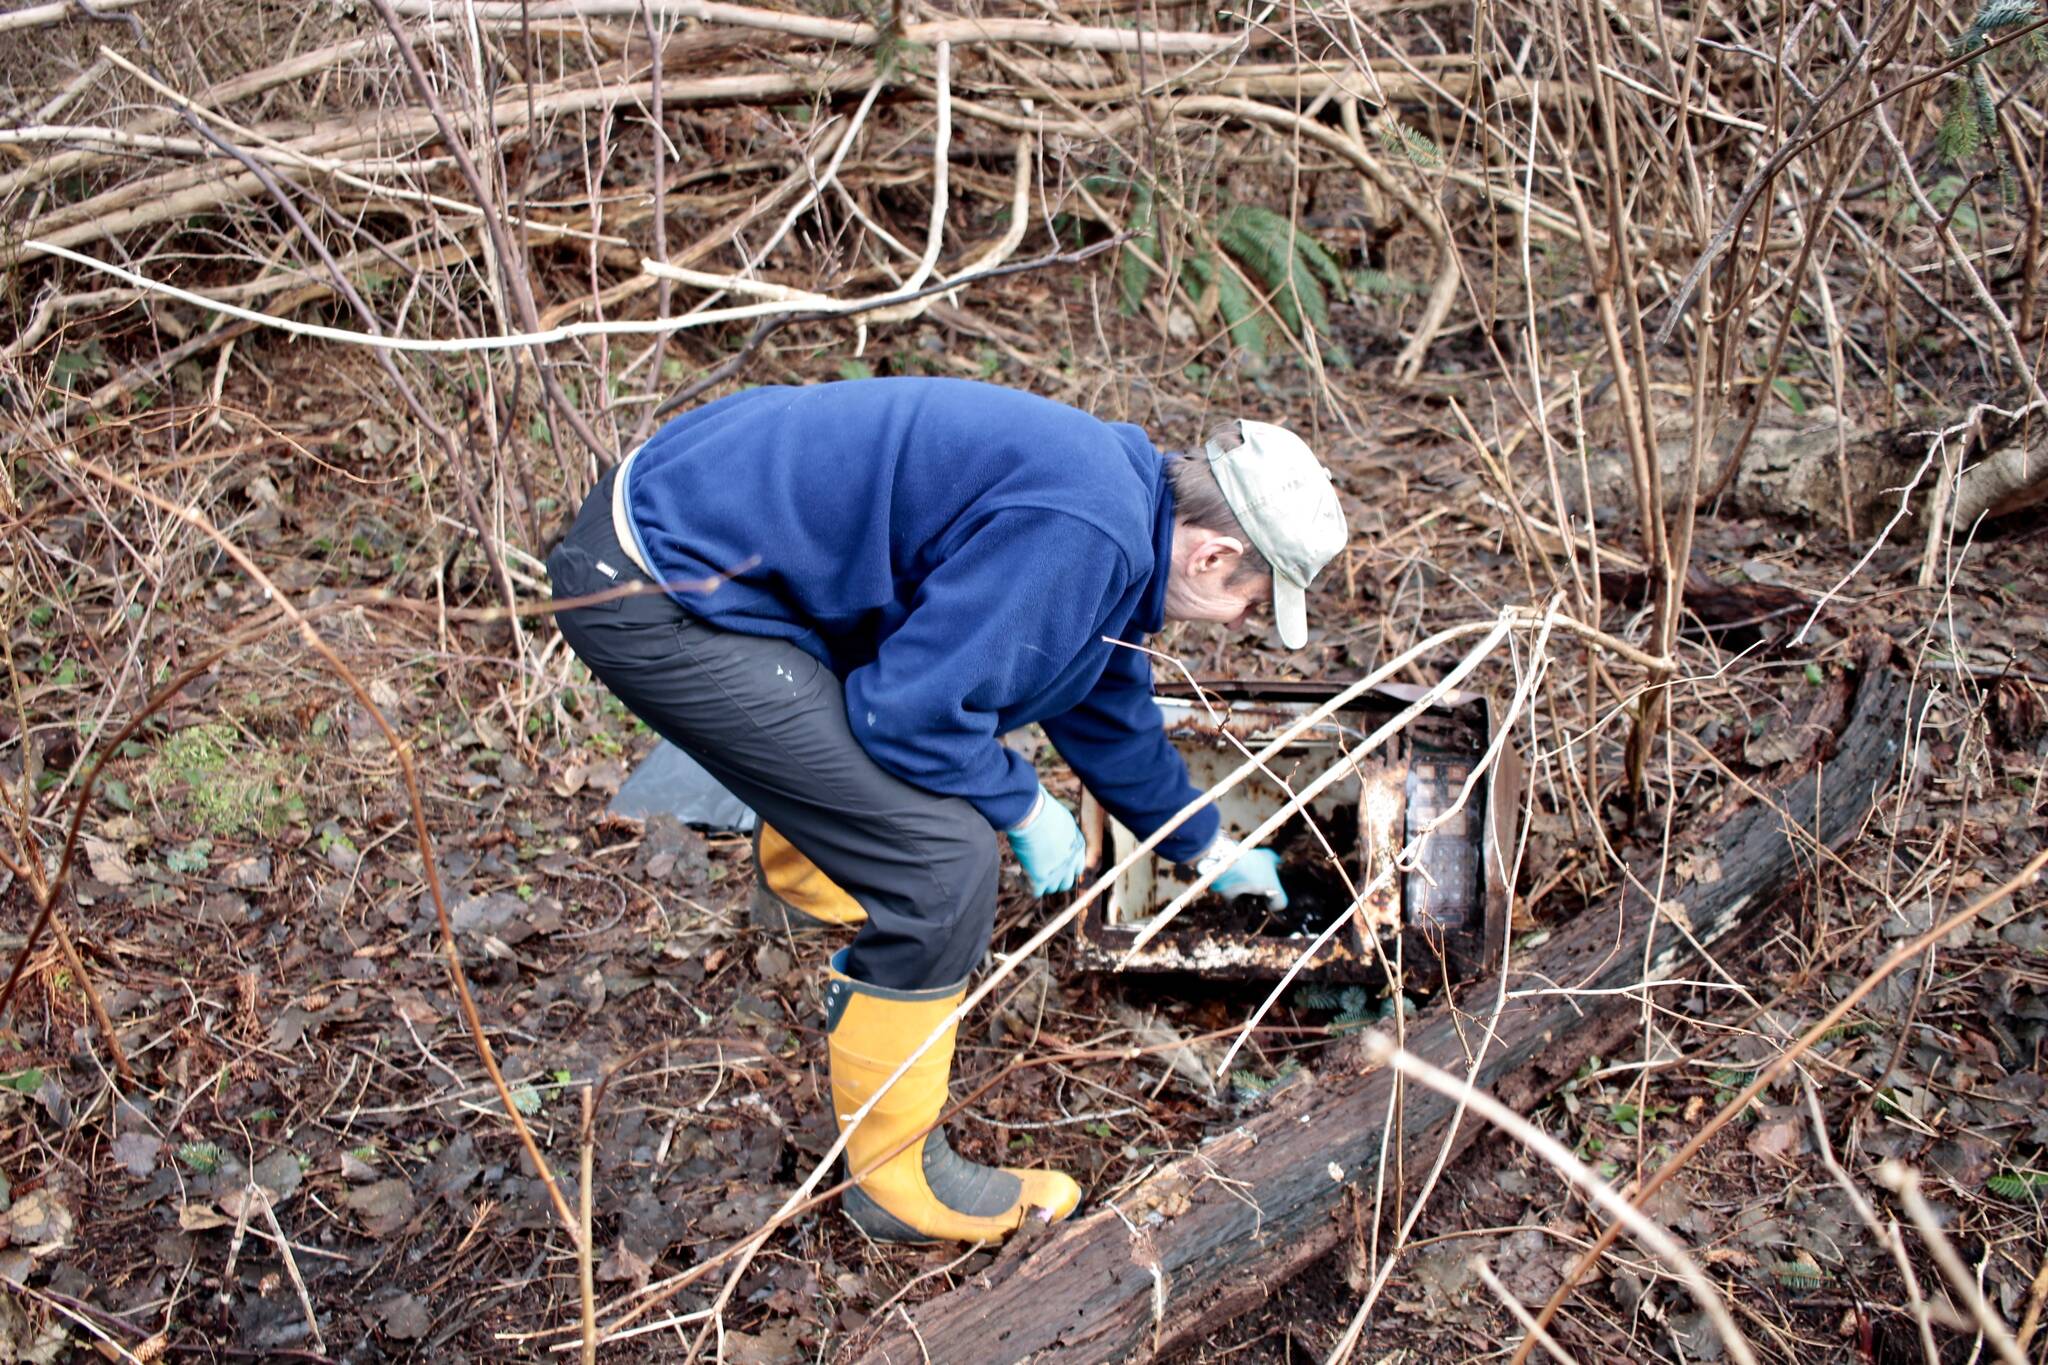 28020154_web1_220201-CRM-Streamkeepers-Bears-CLEANUP_4